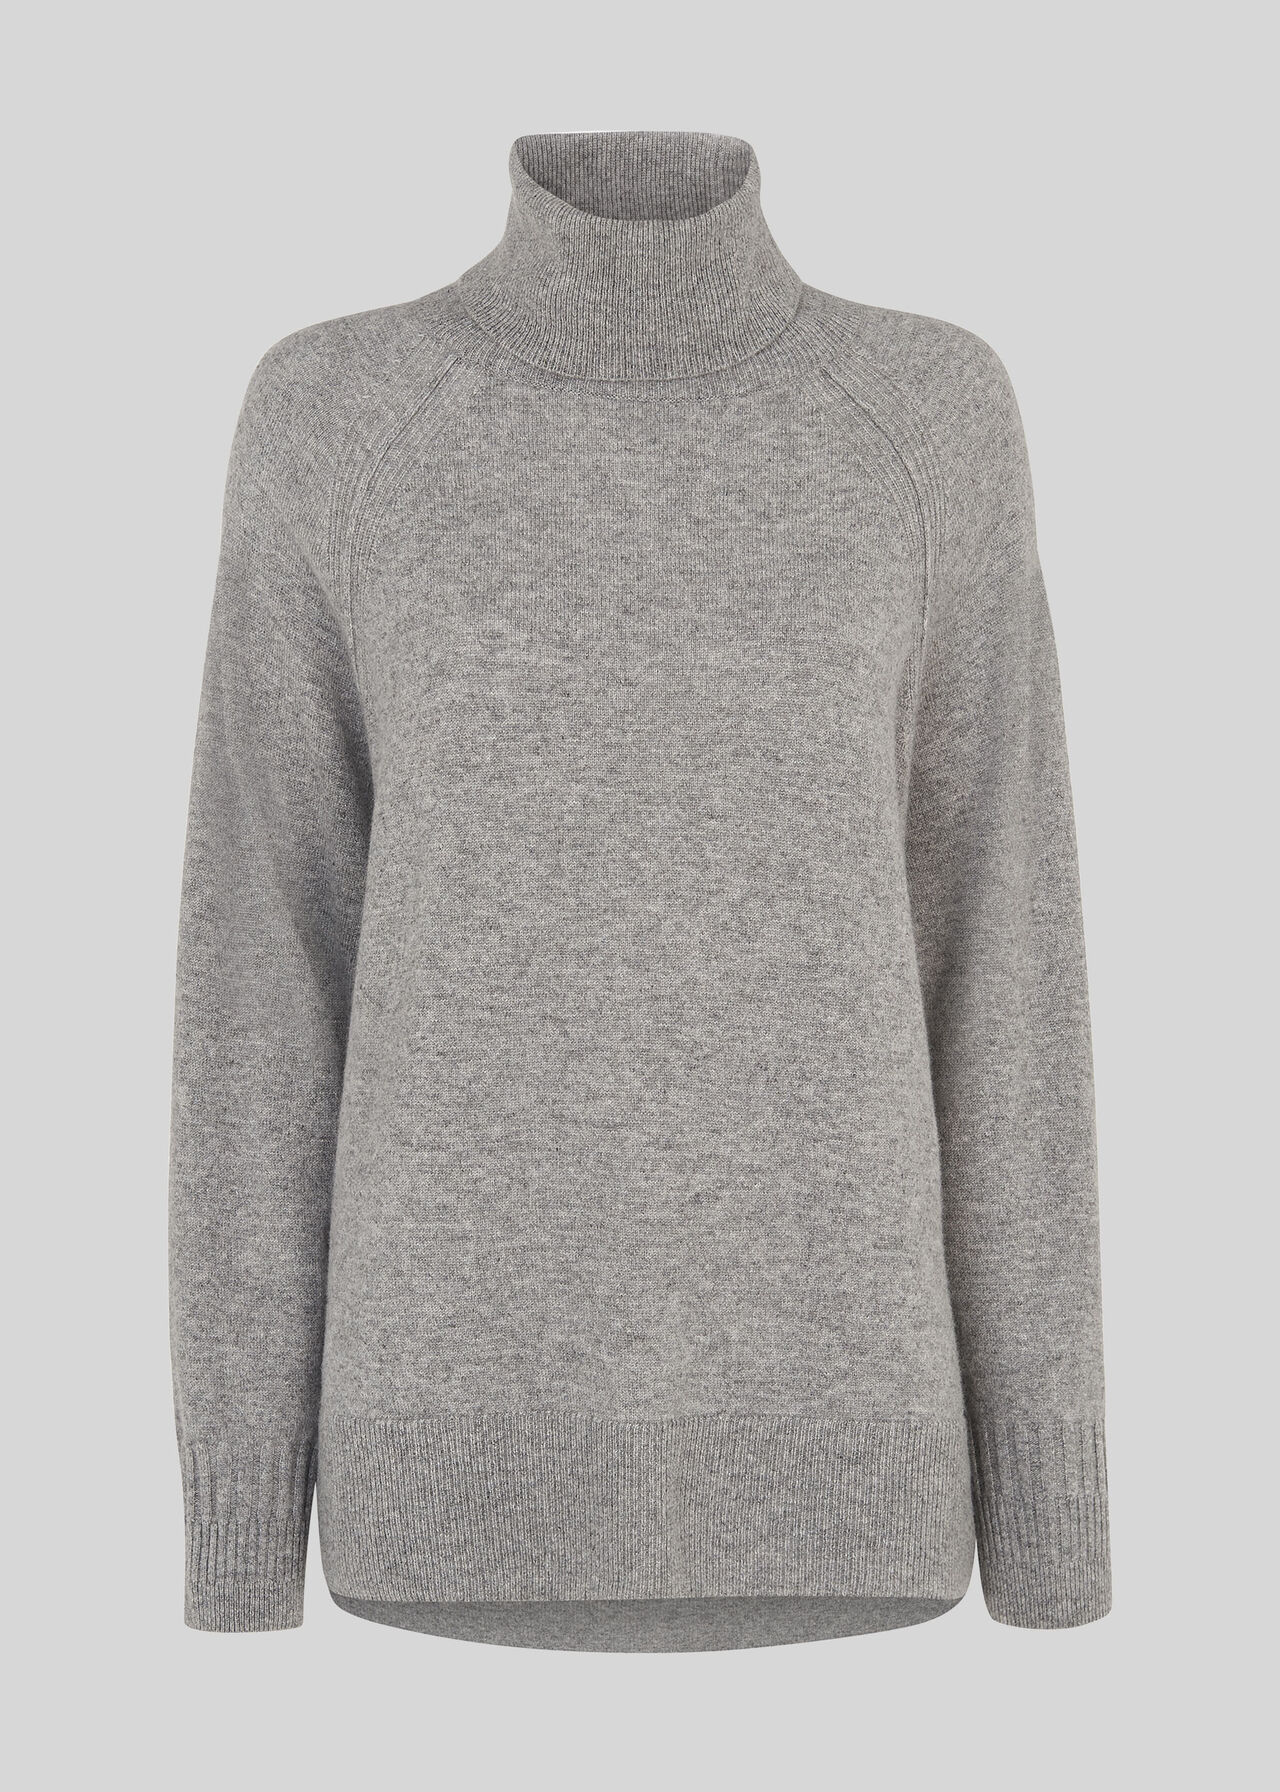 Bookstore Dent bandage Grey Cashmere Roll Neck | WHISTLES 